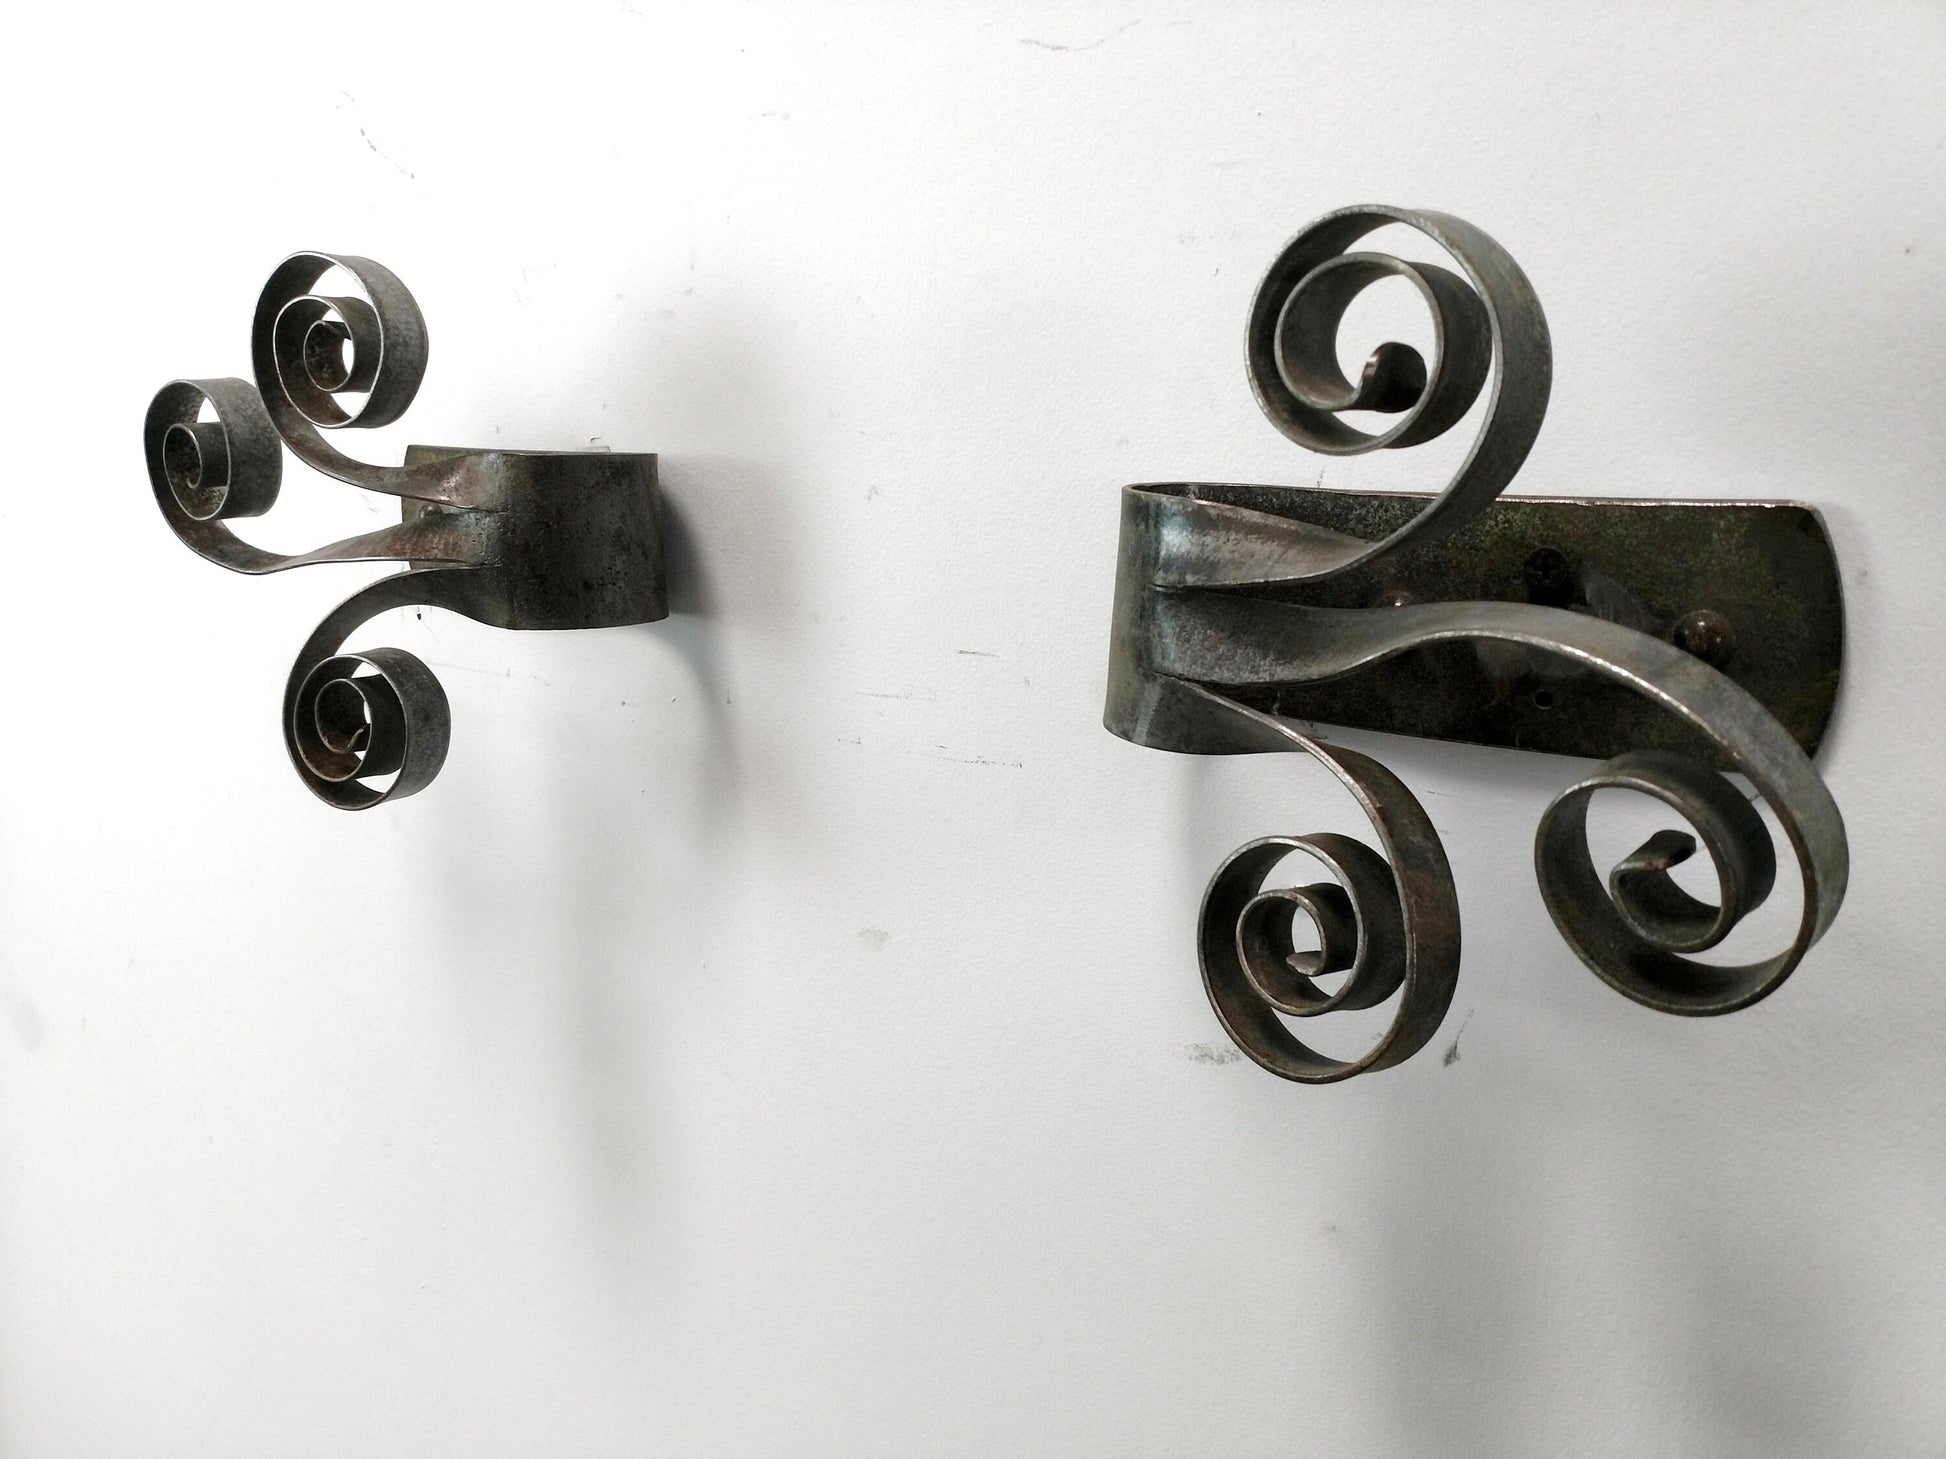 Wine Barrel Curtain Tie Backs - Fleur de Lis - Made from retired CA wine barrel rings. 100% Recycled!